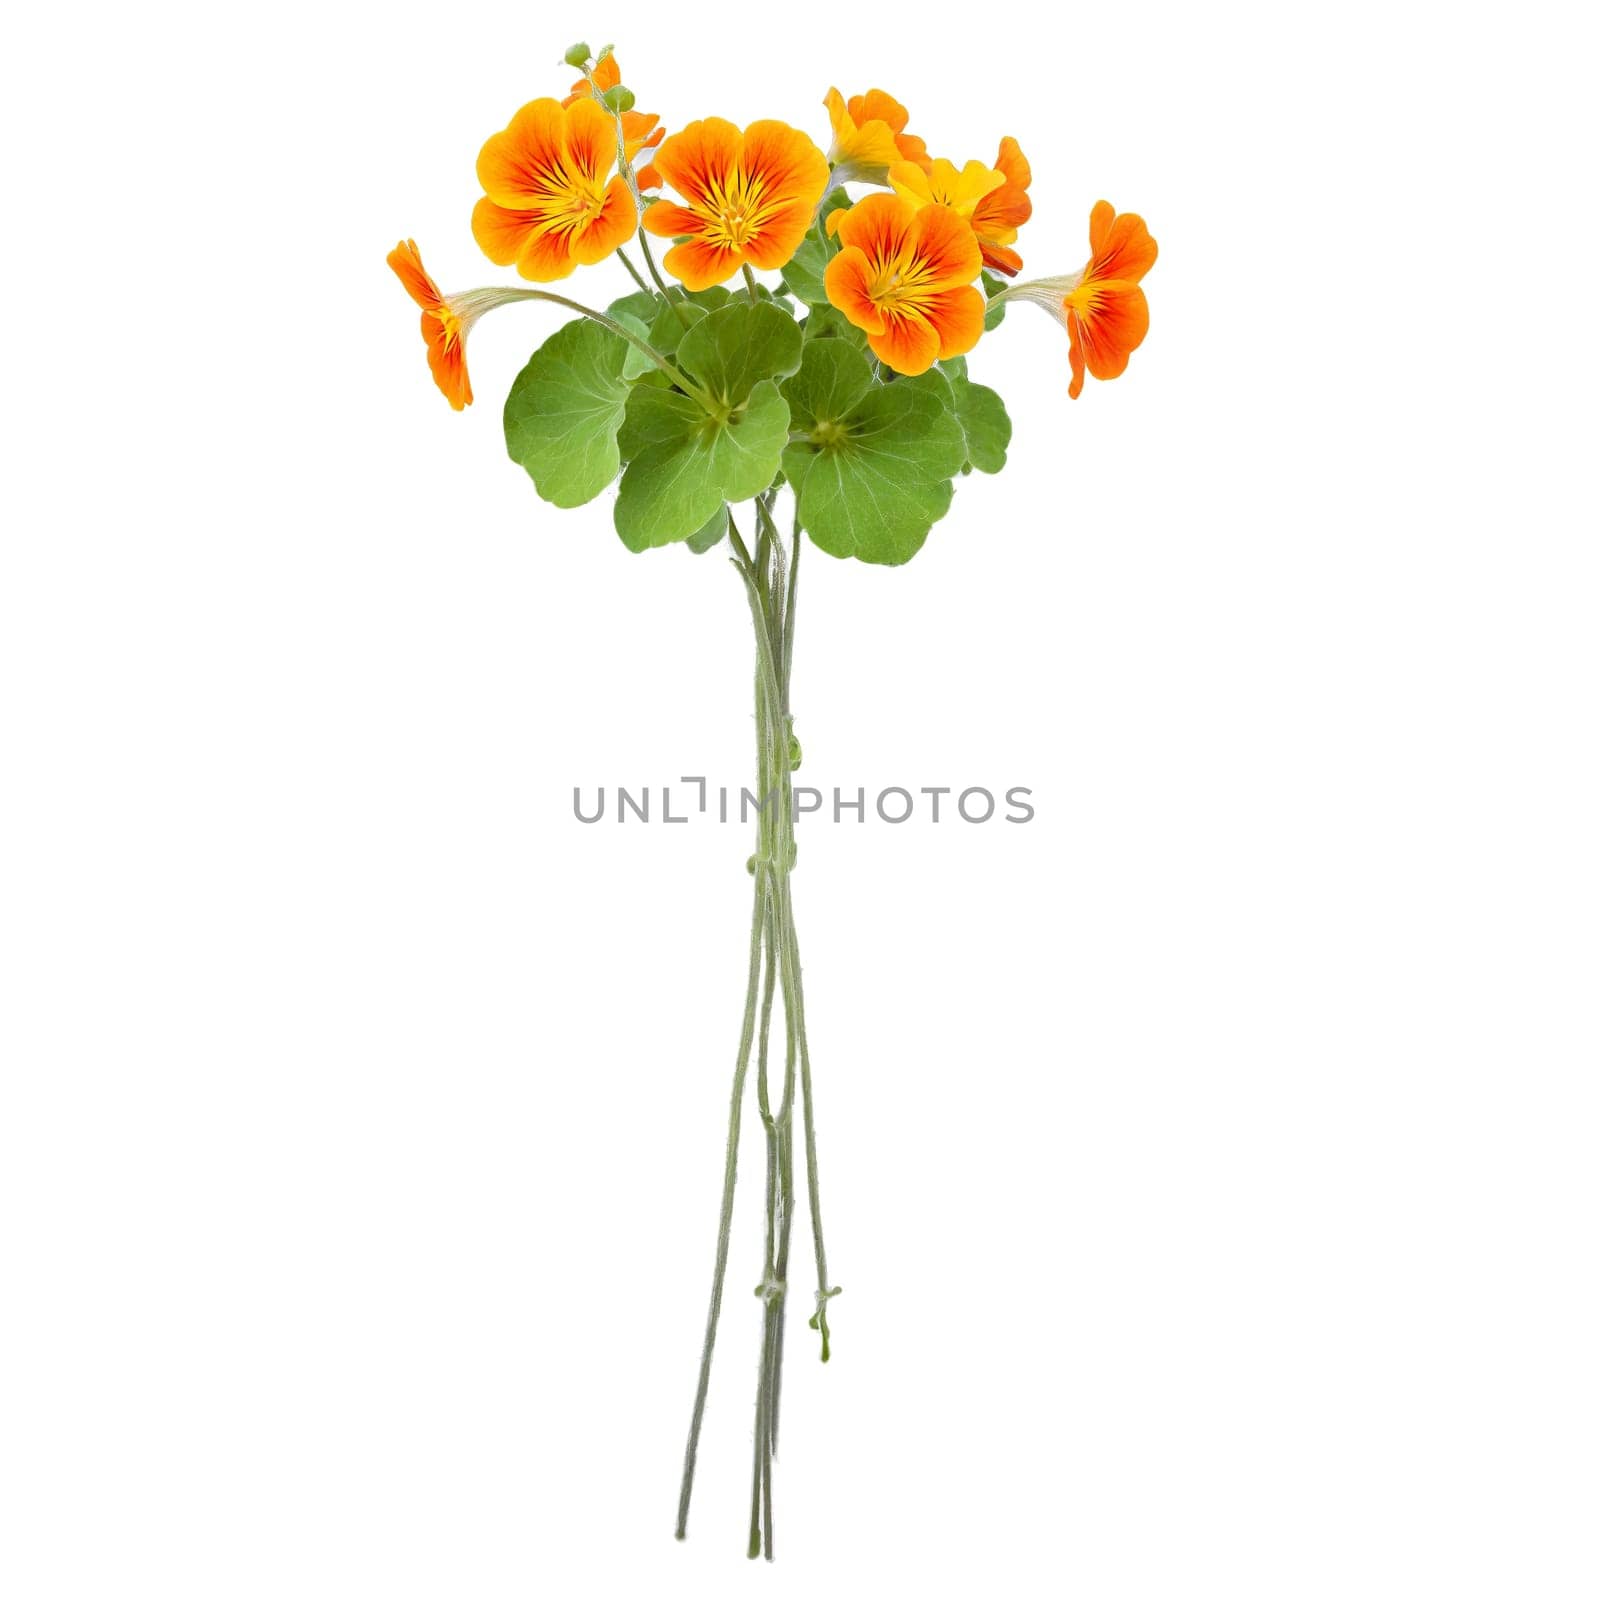 Nasturtium vibrant orange and yellow flowers on trailing stems in a gray concrete bowl Tropaeolum by panophotograph